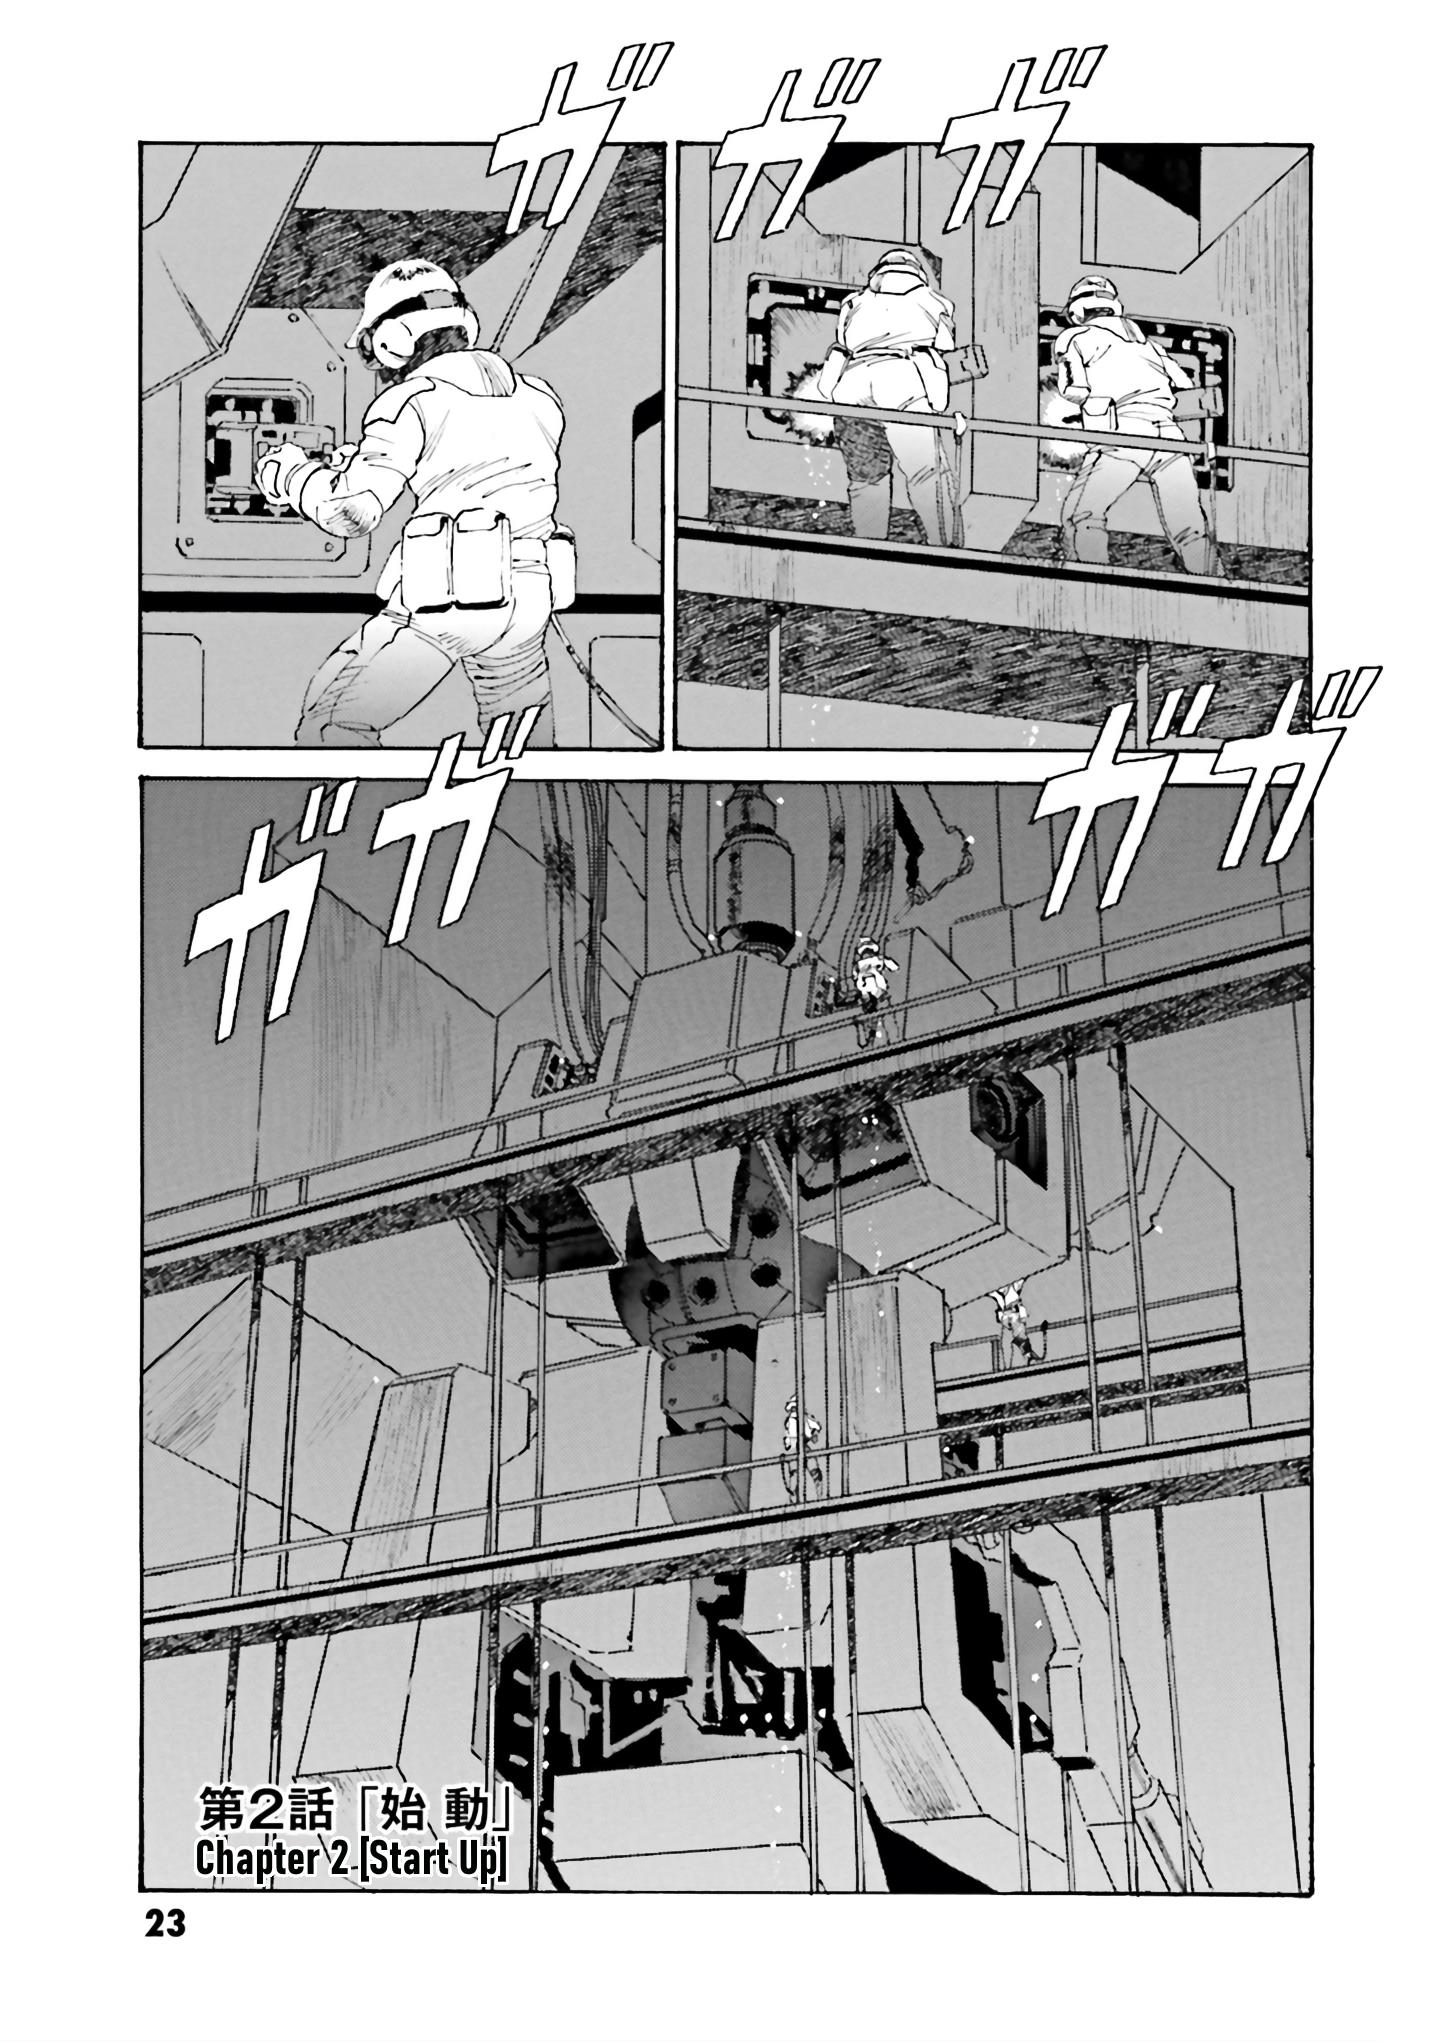 Mobile Suit Gundam: The Revival Of Zeon - Remnant One Vol.1 Chapter 2: Start Up - Picture 1